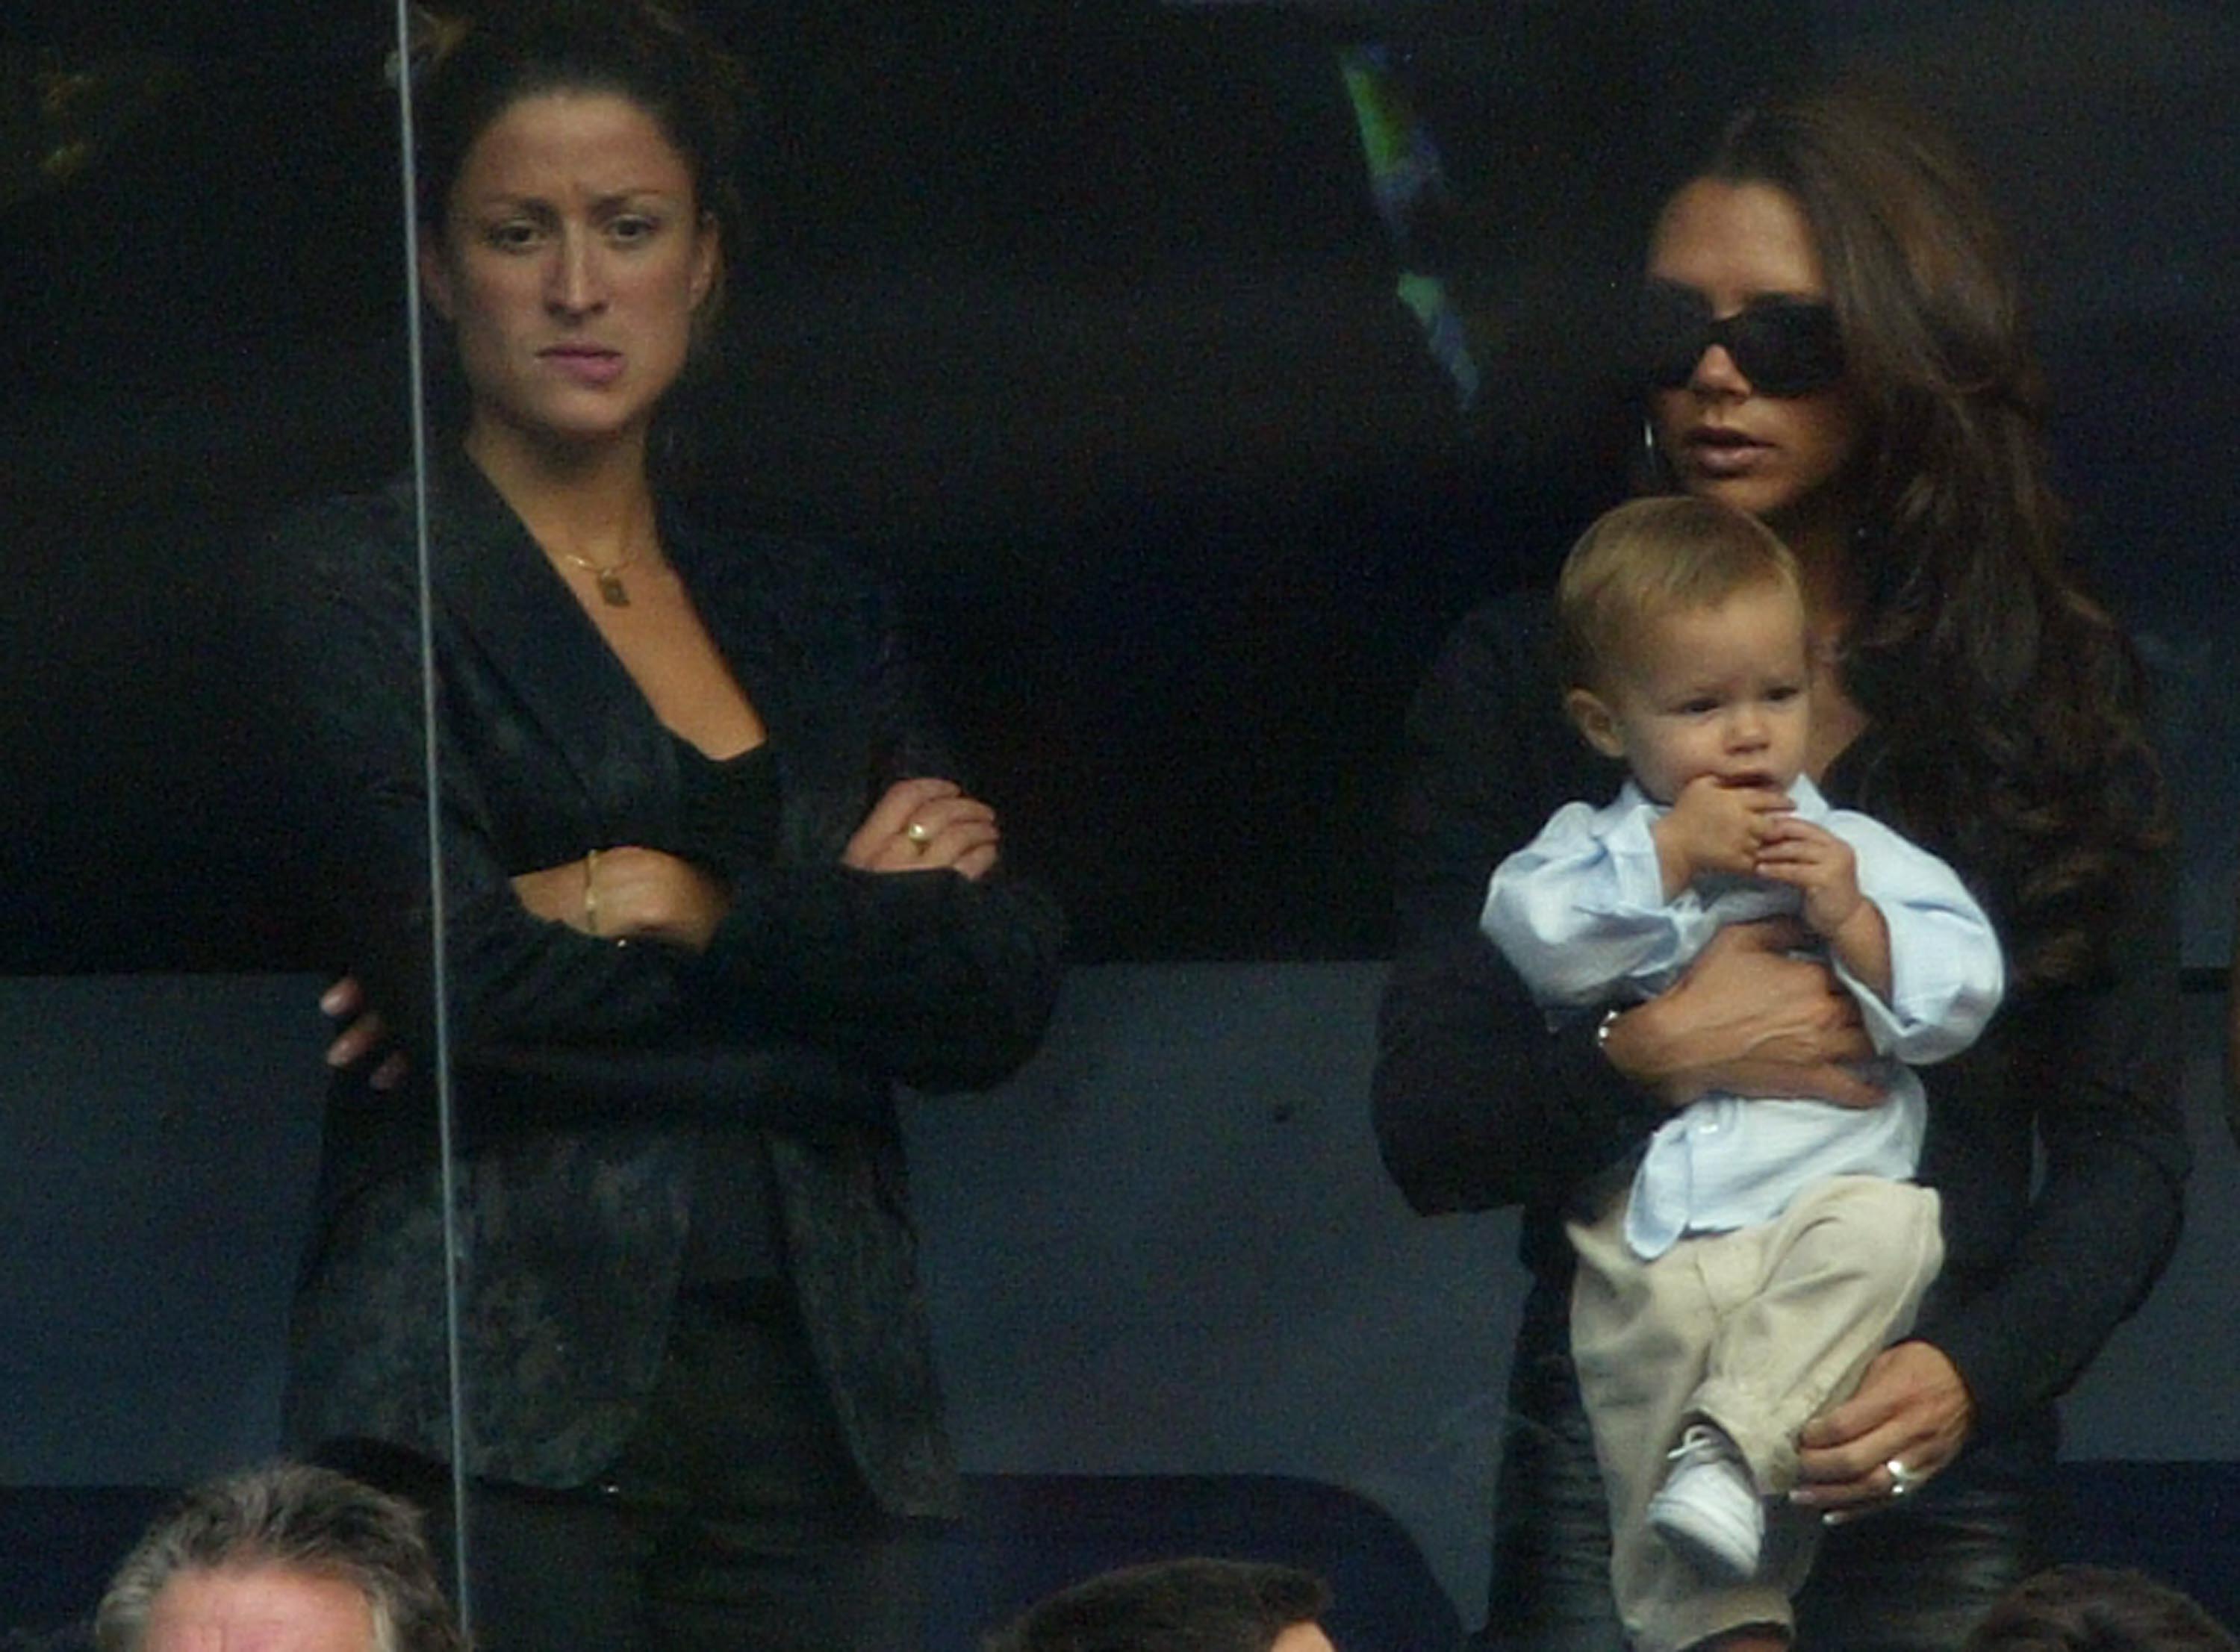 Rebecca Loos, Victoria Beckham, and Romeo Beckham during the Spanish Primera Liga match between Real Madrid and Valladolid in Madrid, Spain on September 13, 2003 | Source: Getty Images